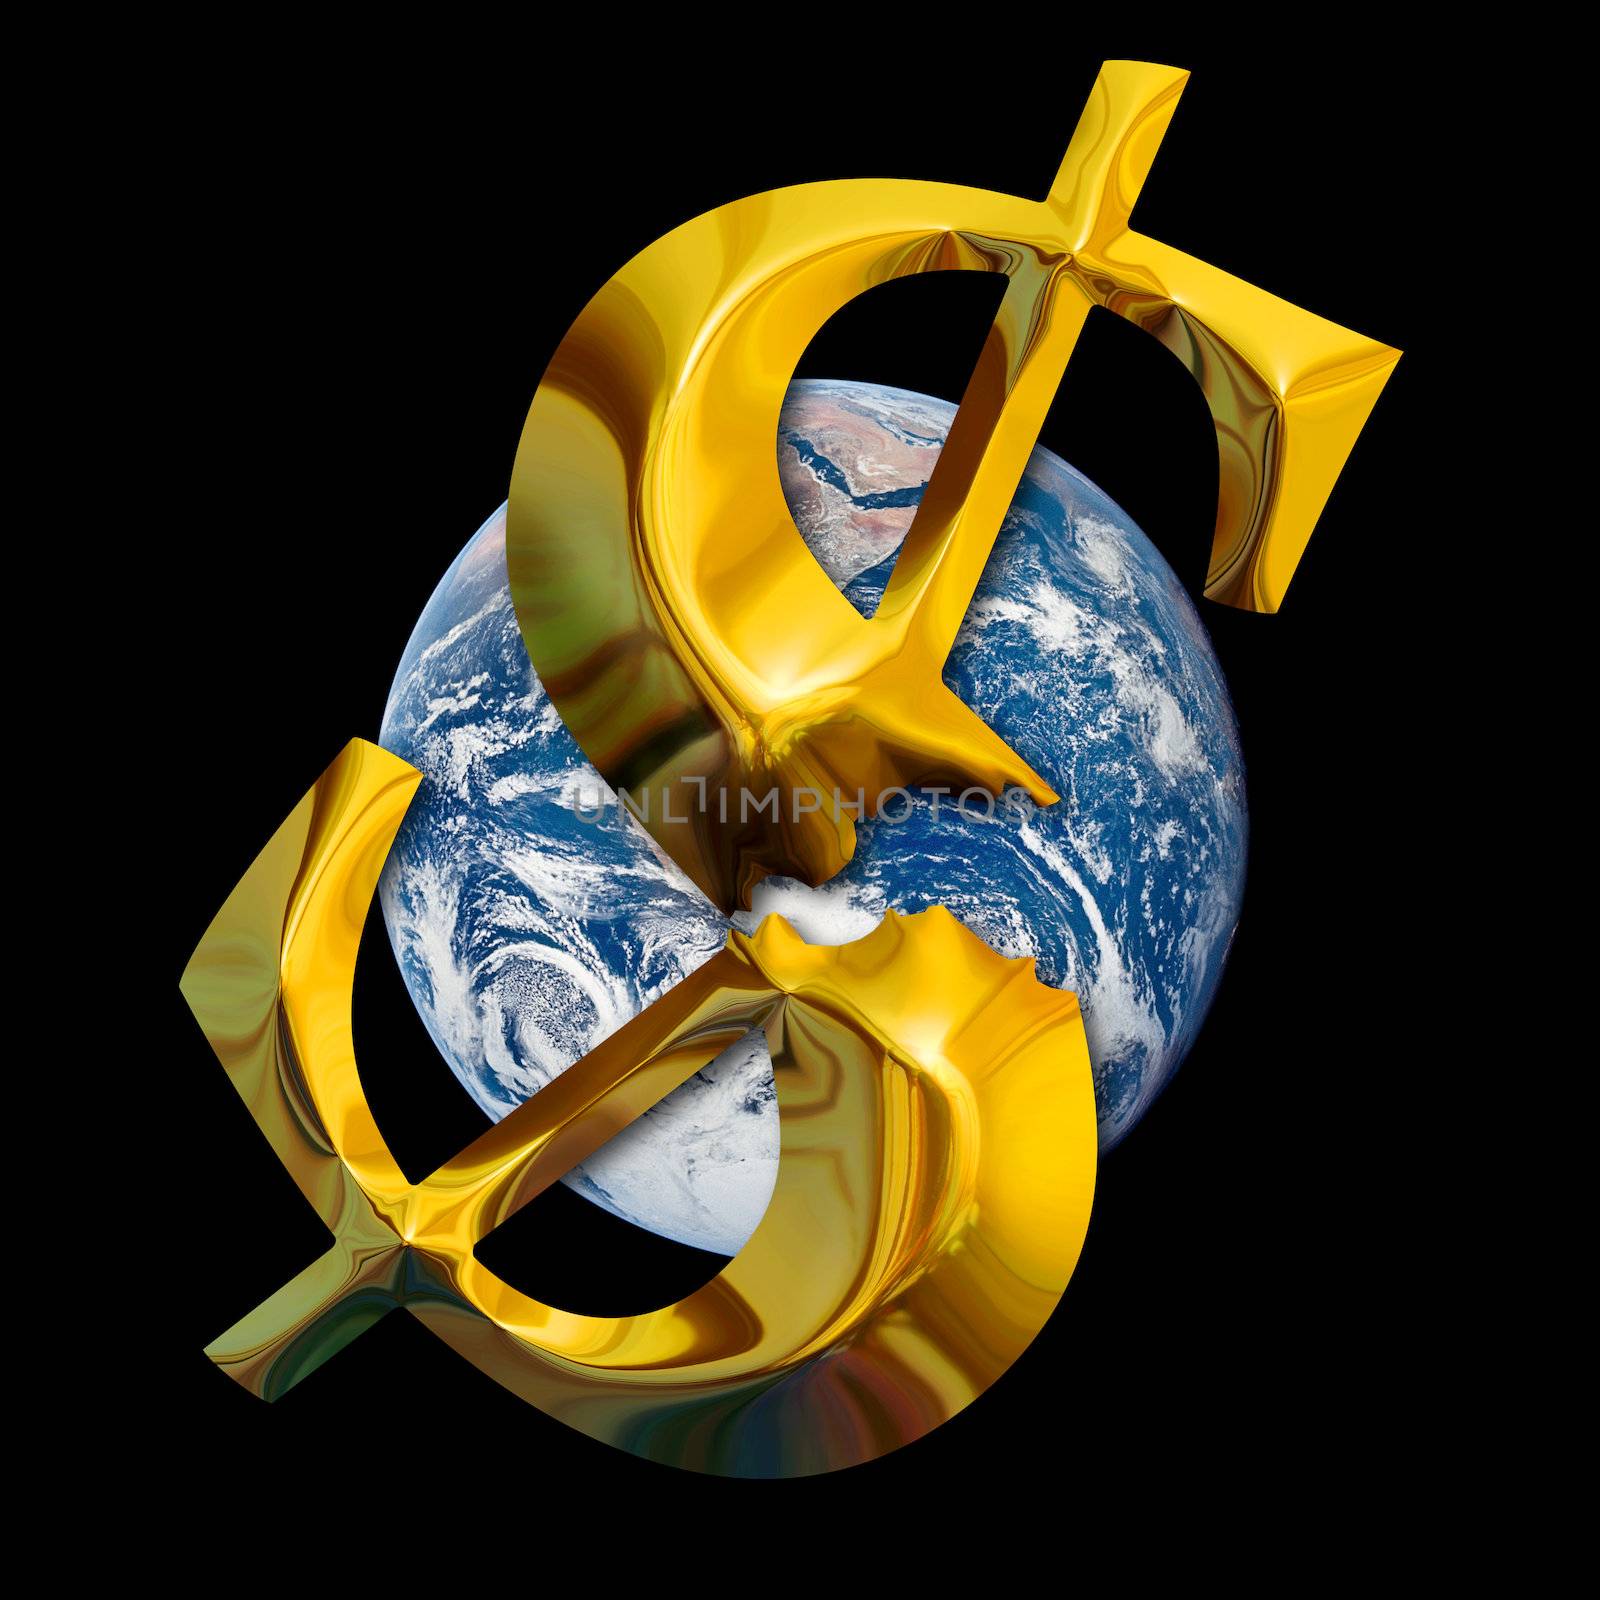 Global financial crisis. Broken gold dollar against earth background. Elements of this image furnished by NASA